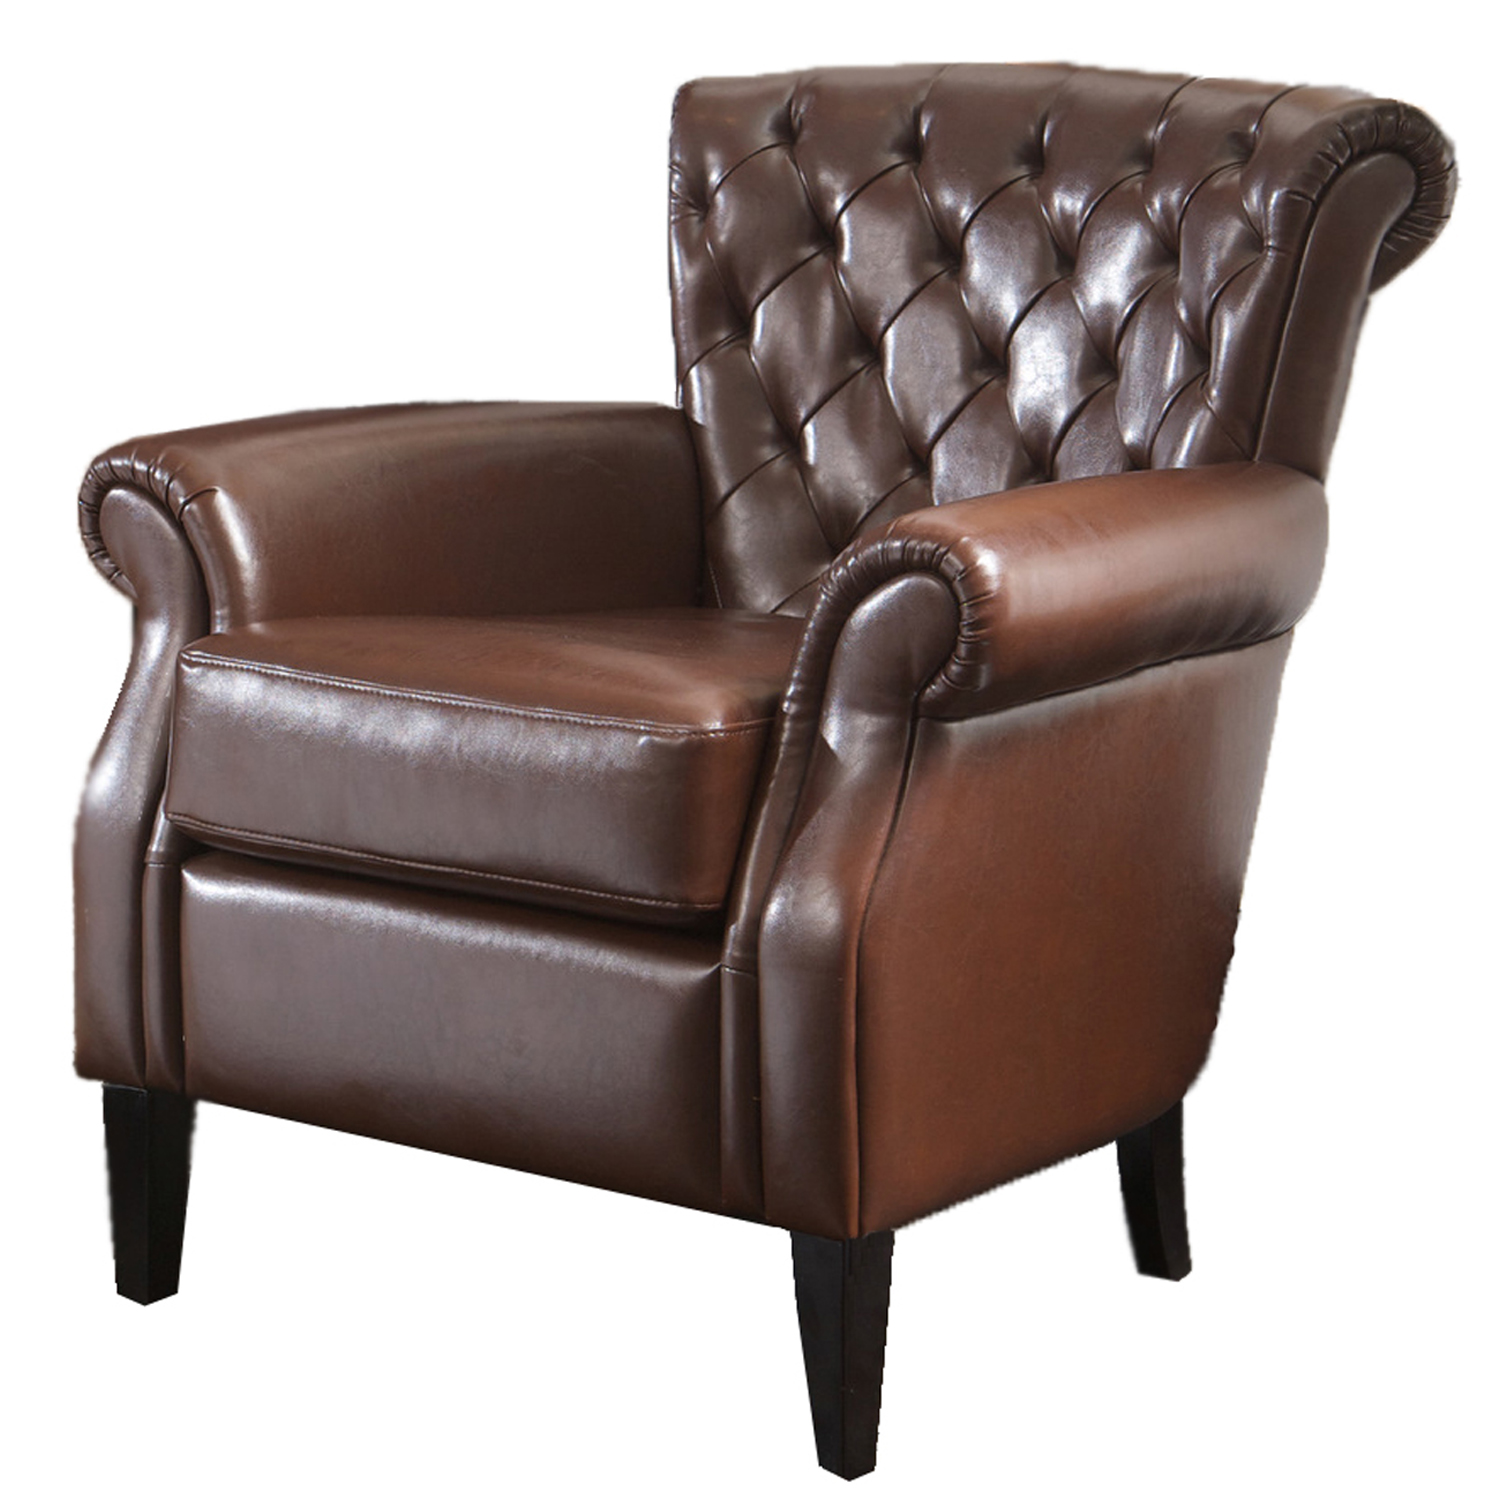 Franklin Brown Tufted Leather Club Chair